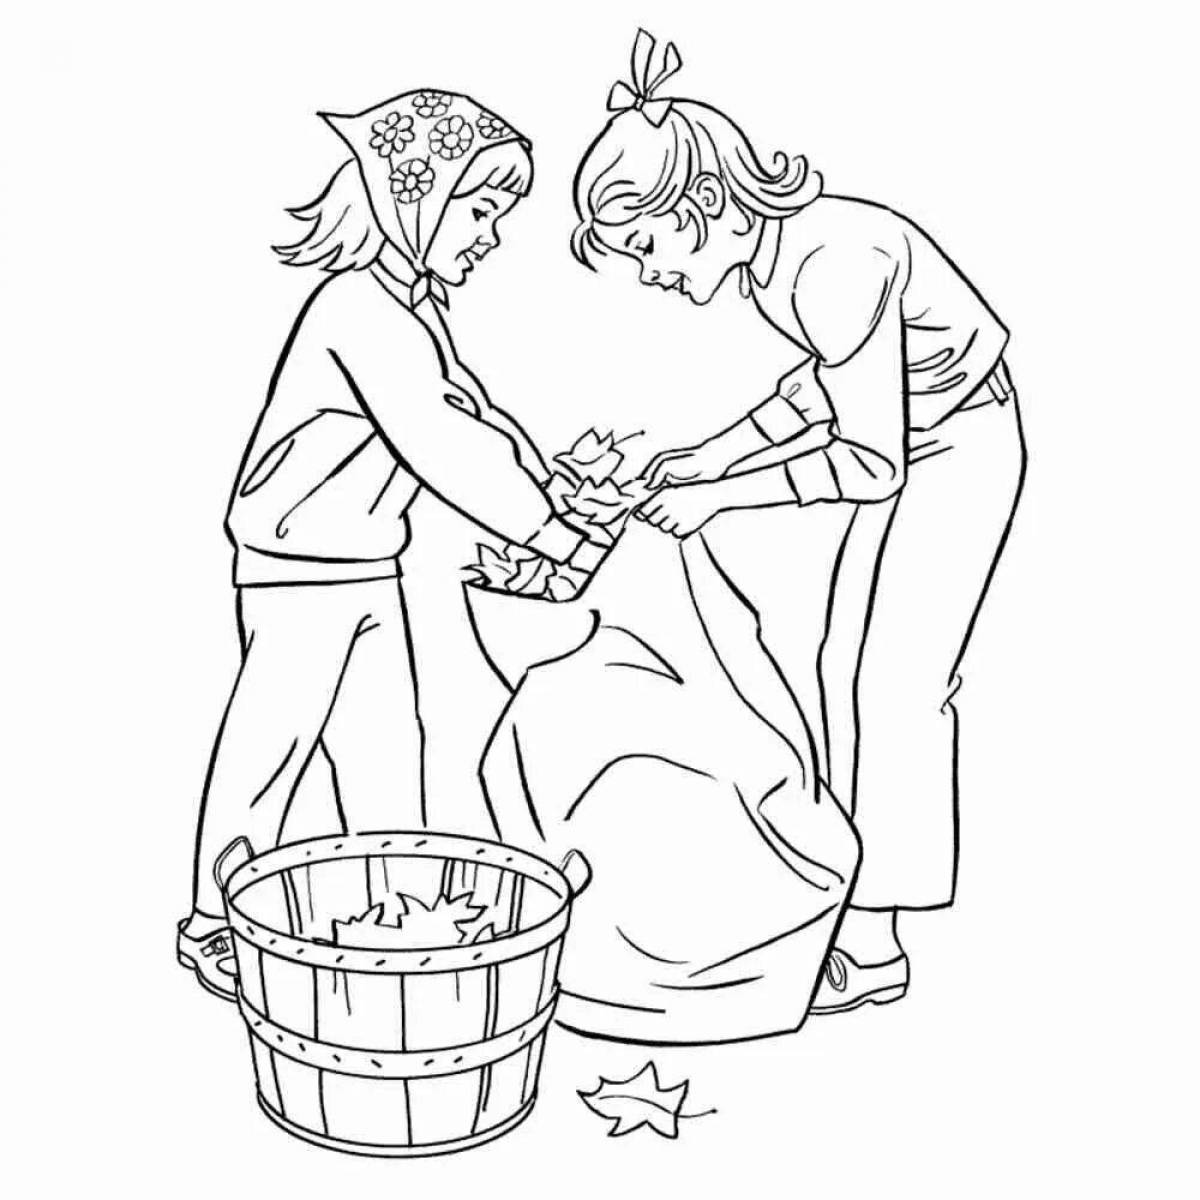 Decided volunteers coloring page